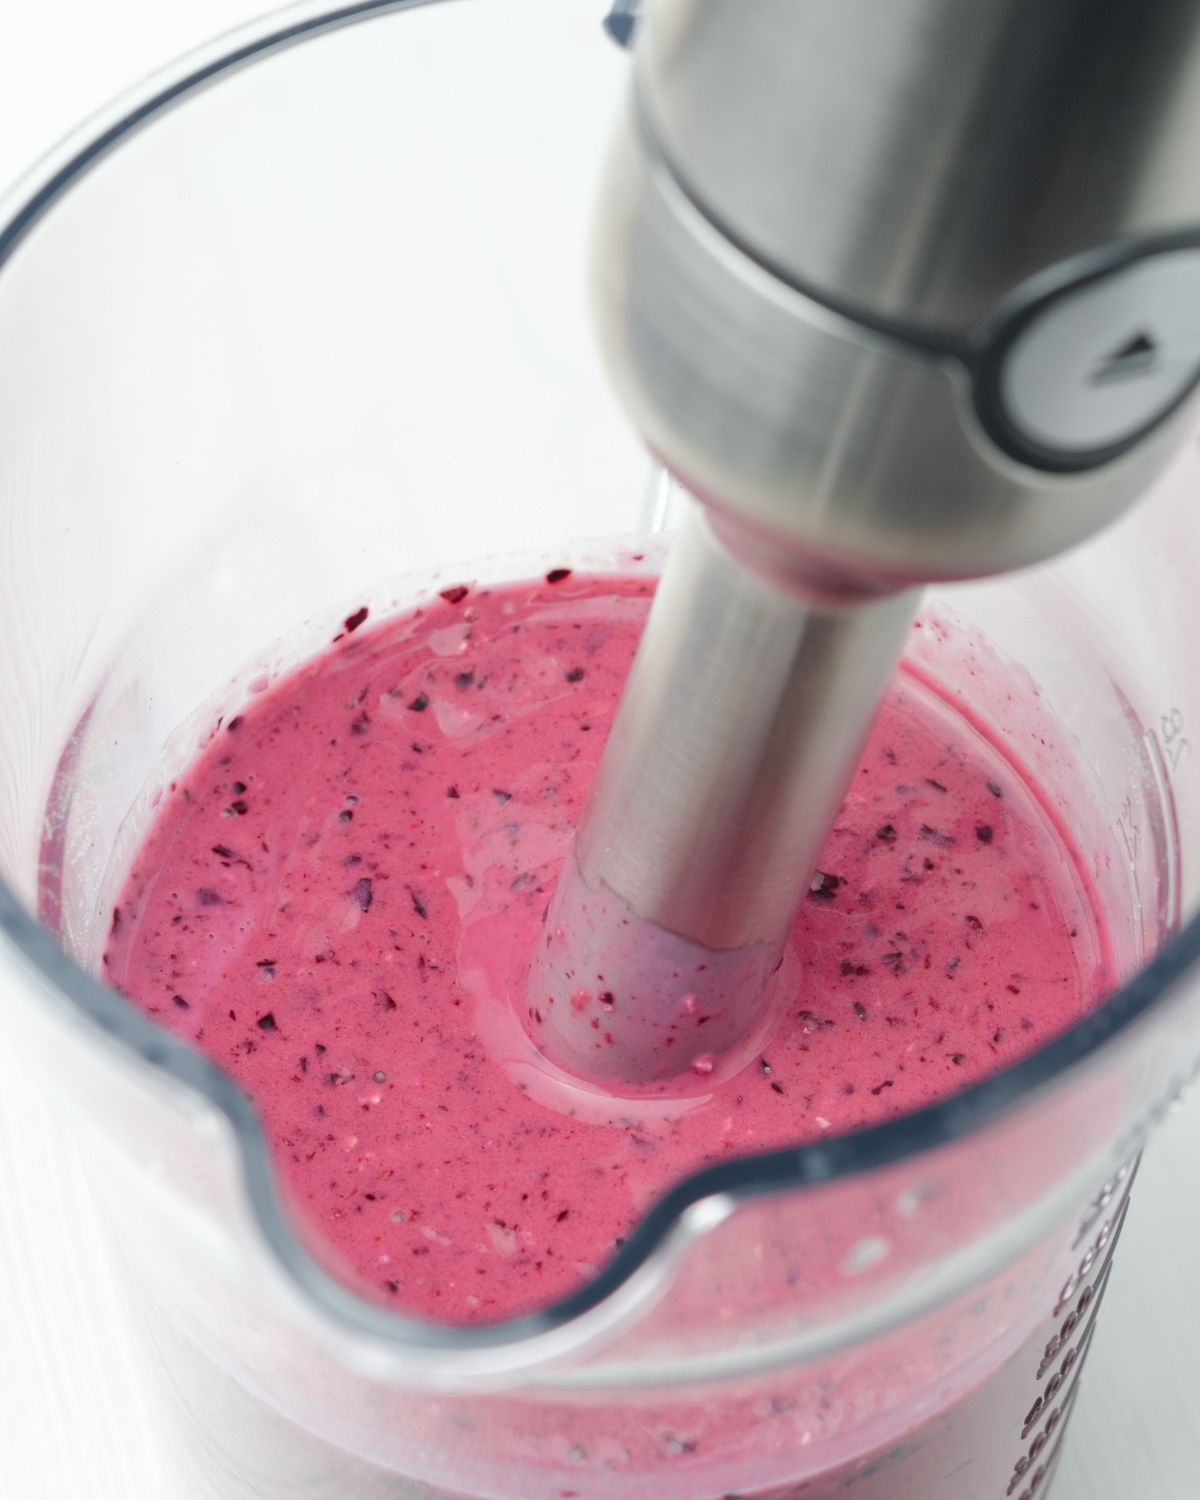 A blender mixing the fruit together.